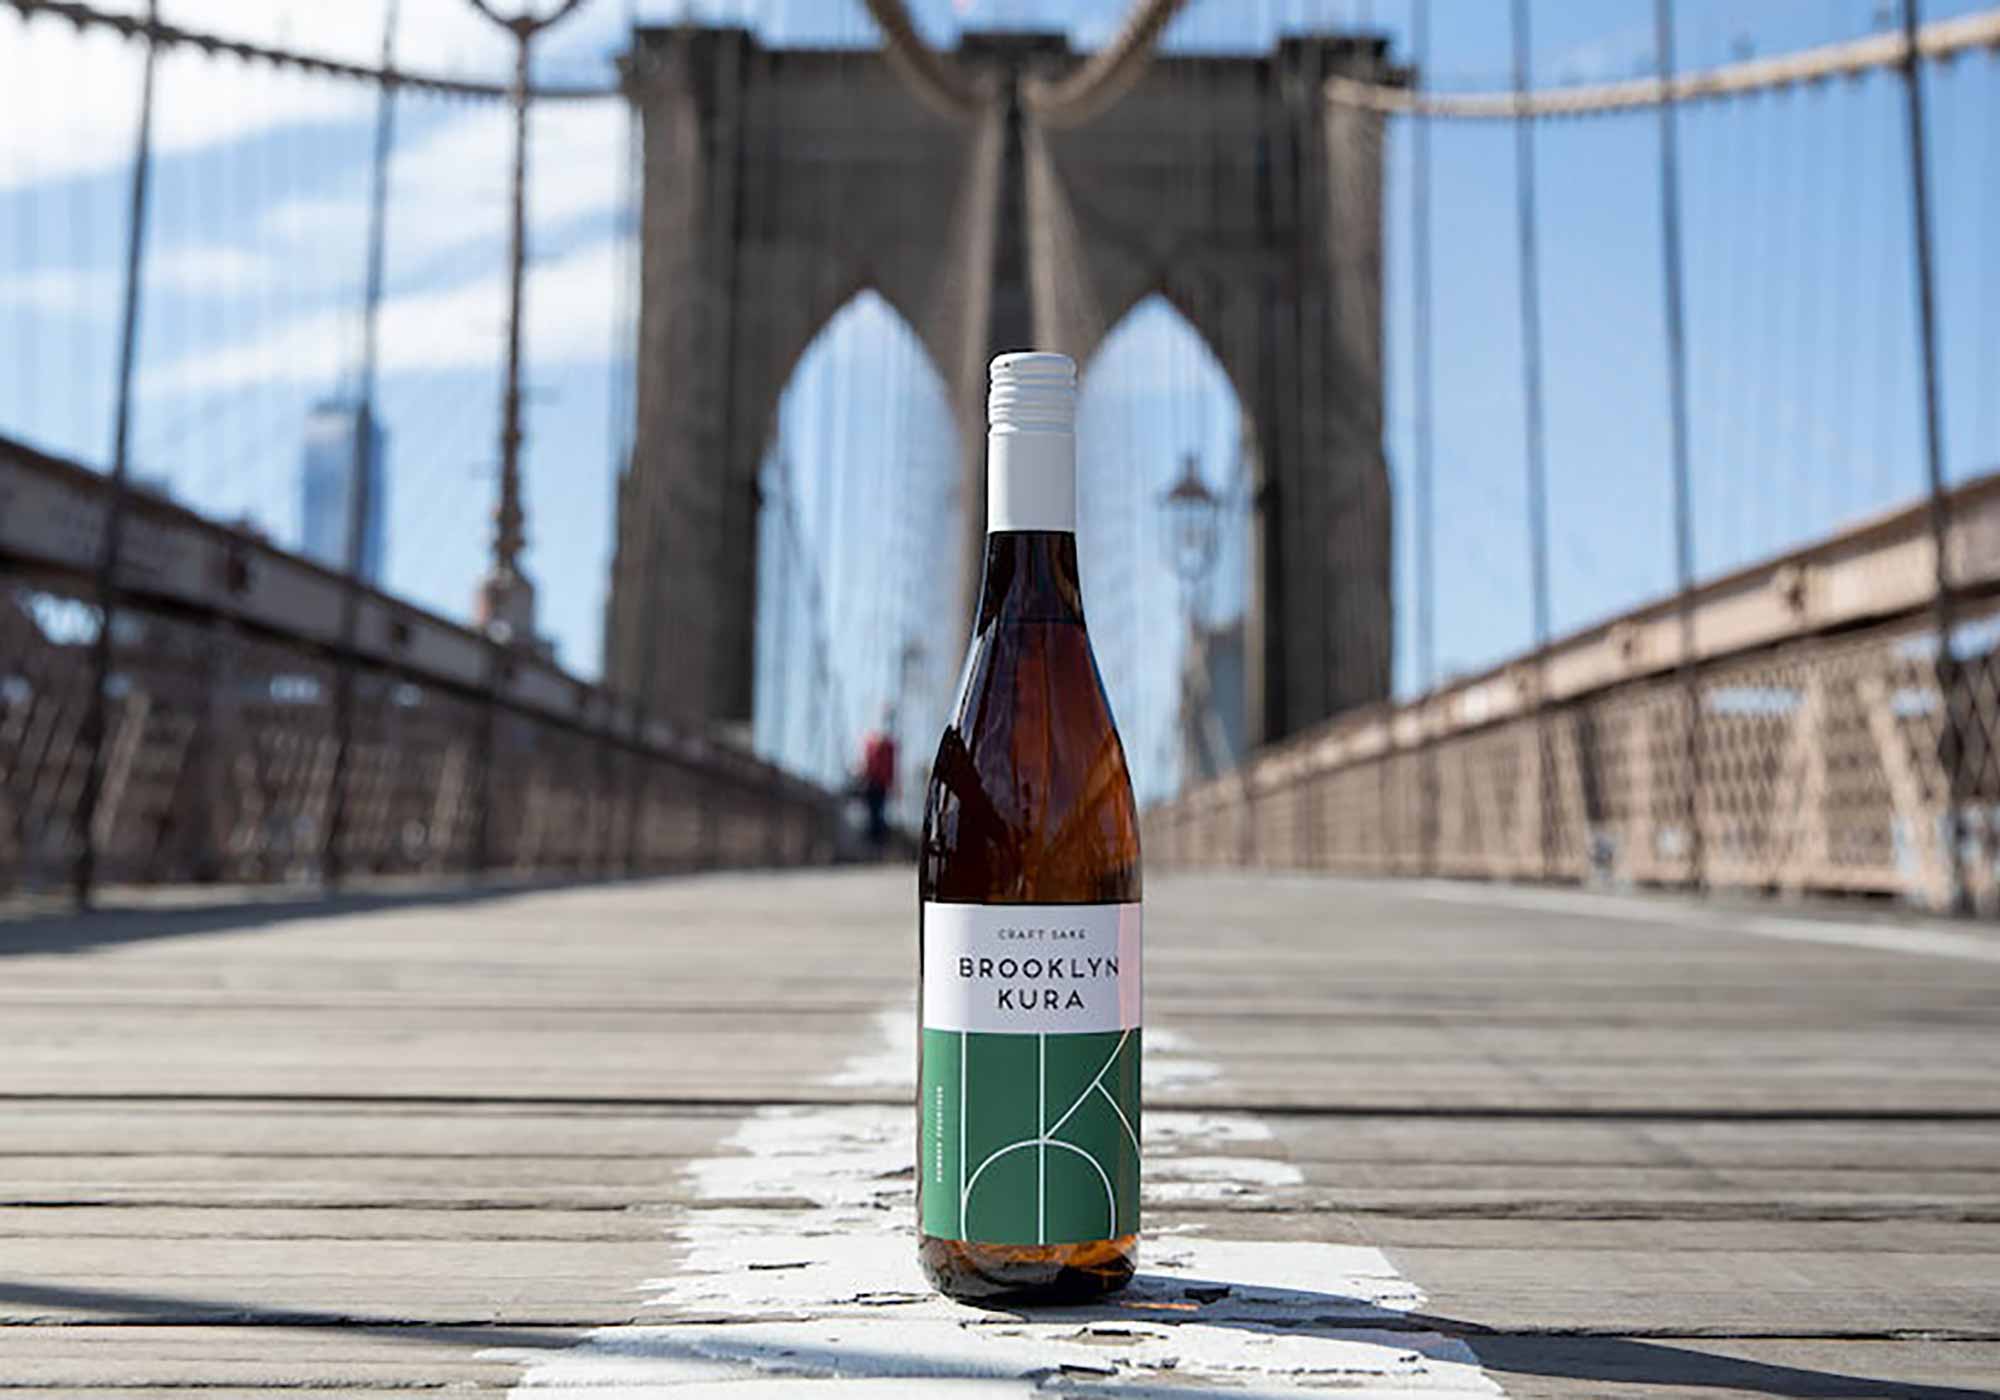 The 11 Best Breweries in Brooklyn, NY